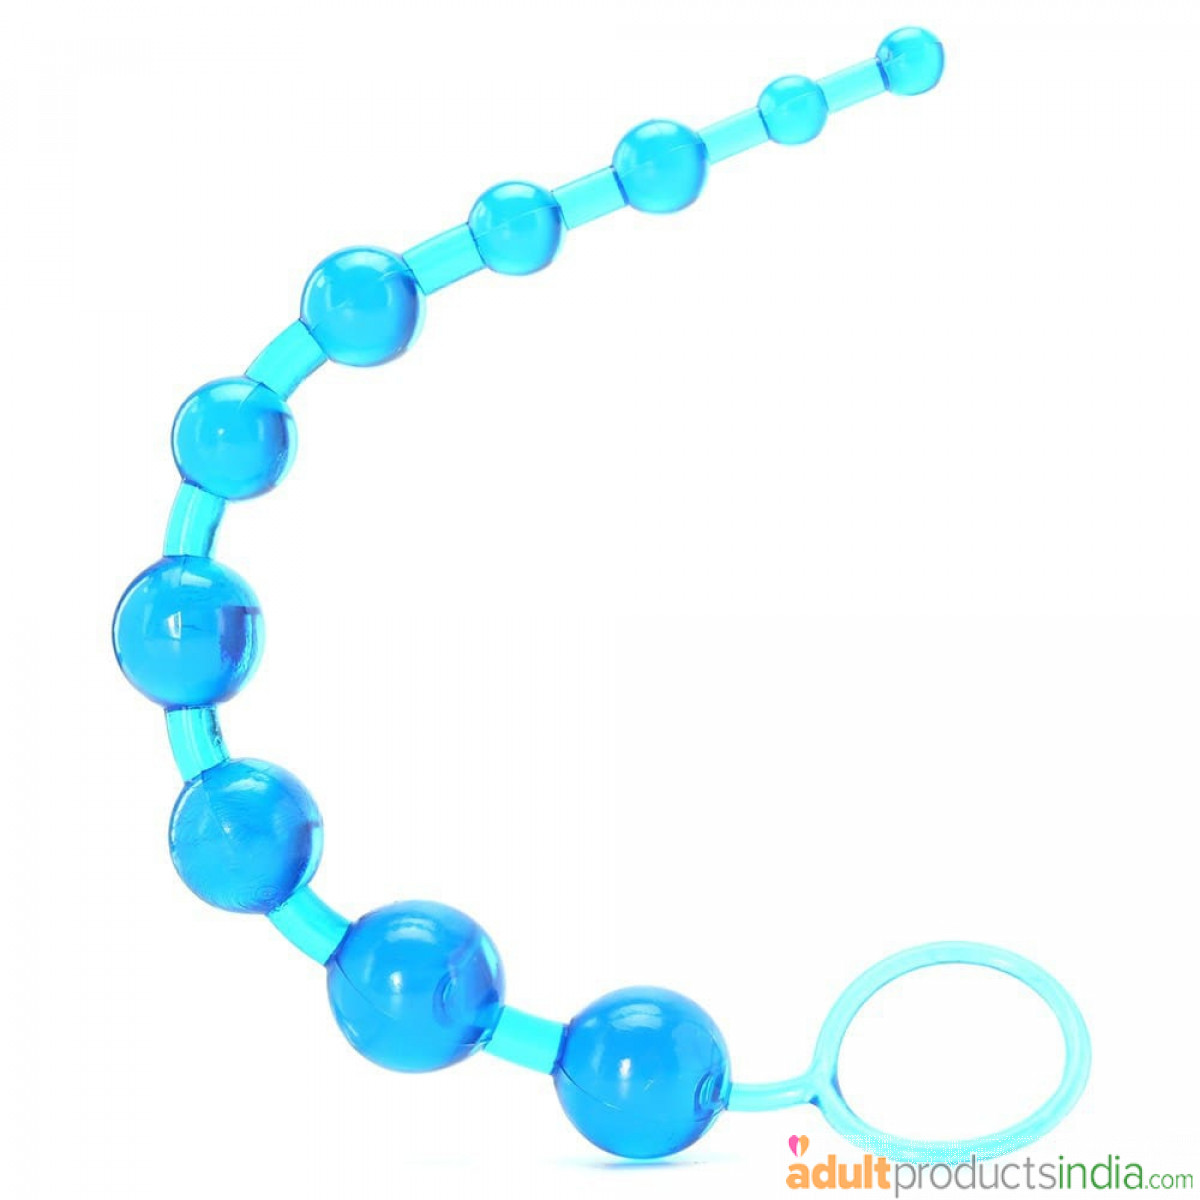 Anal Beads Blue Adult Products India 4690